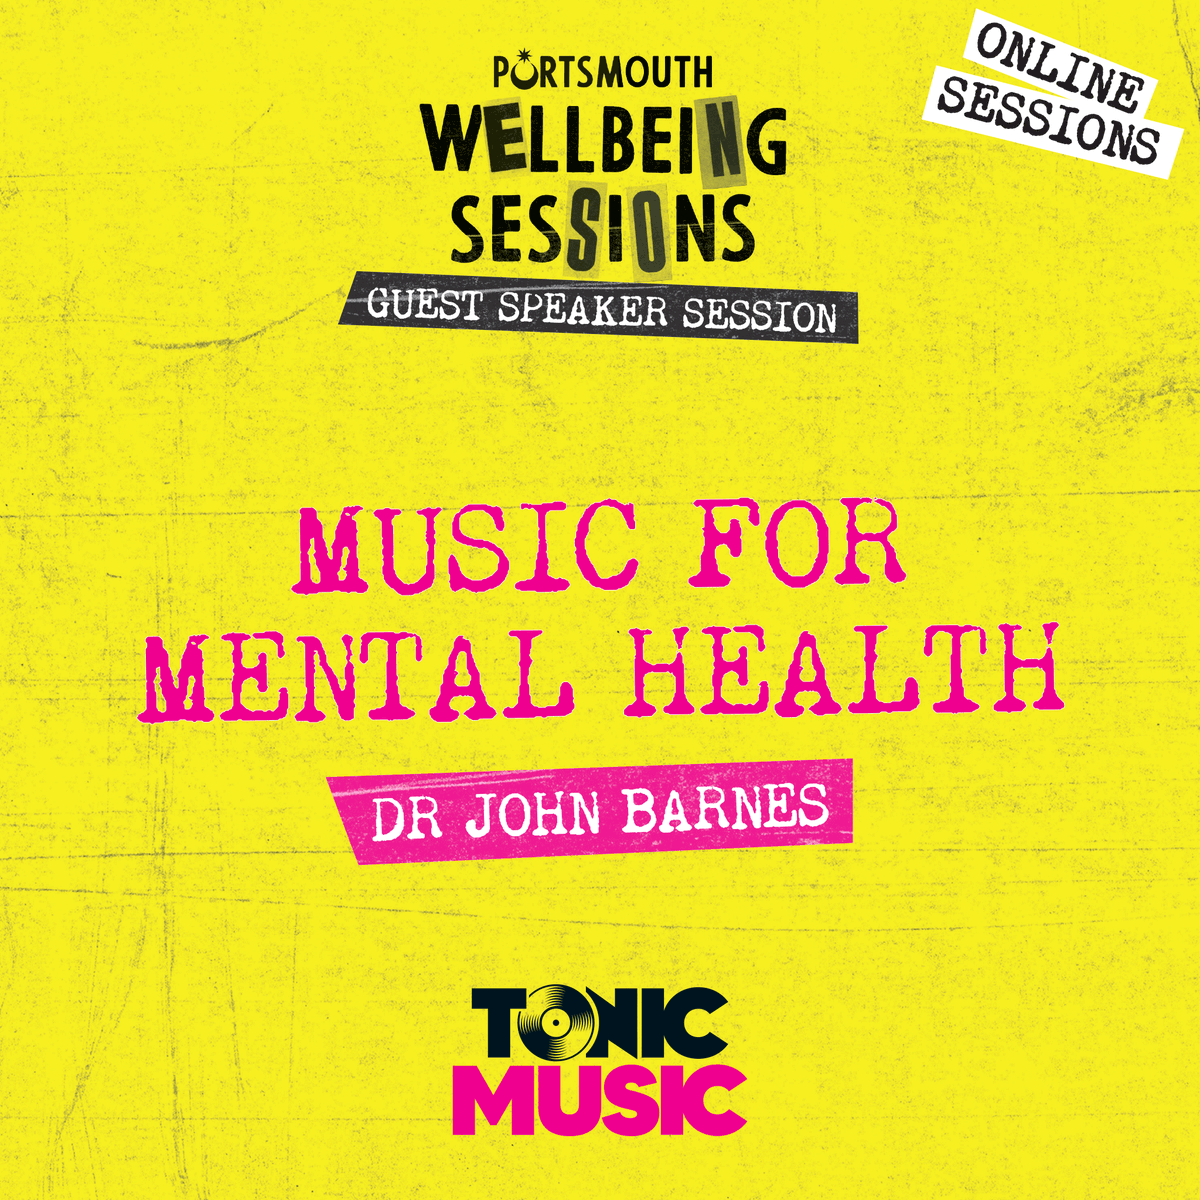 Tonight at 7:00pm Guest speaker session, Dr John Barnes -''Music for Mental Health' Online workshops for people in Portsmouth and surrounding area Book your your place, by emailing teamtonic@tonicmusic.co.uk #Portsmouth #Hampshire #MentalHealth #Wellbeing